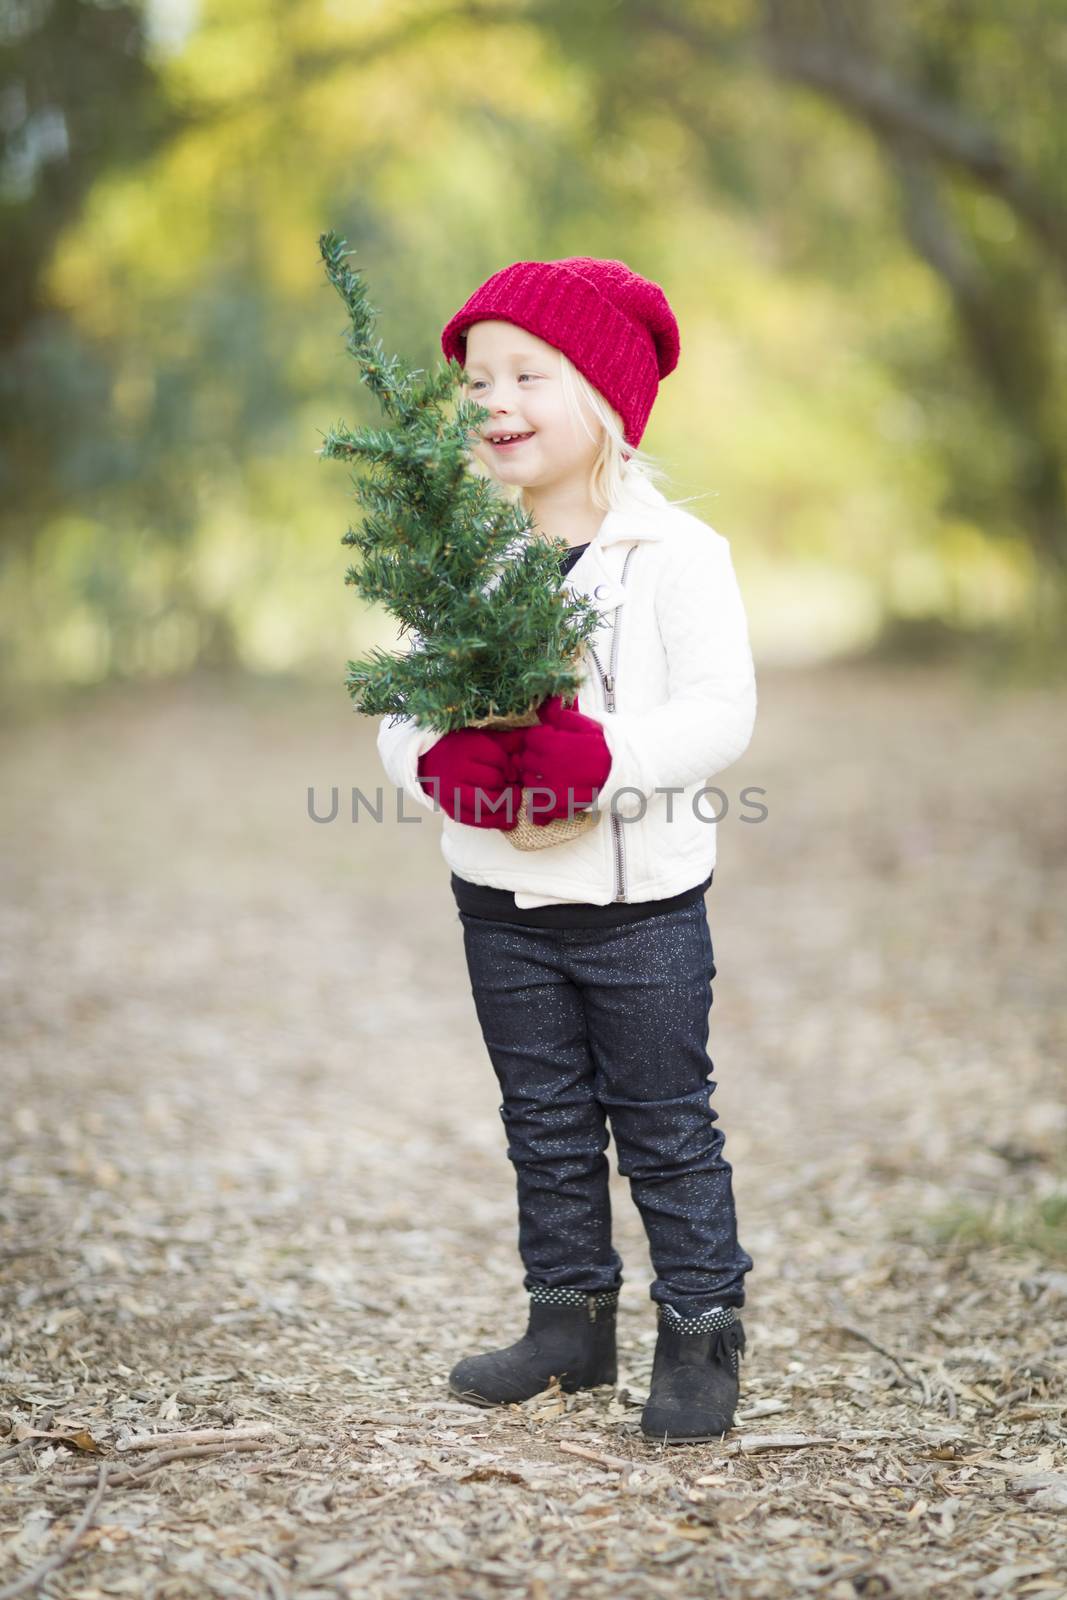 Baby Girl In Red Mittens and Cap Holding Small Christmas Tree by Feverpitched